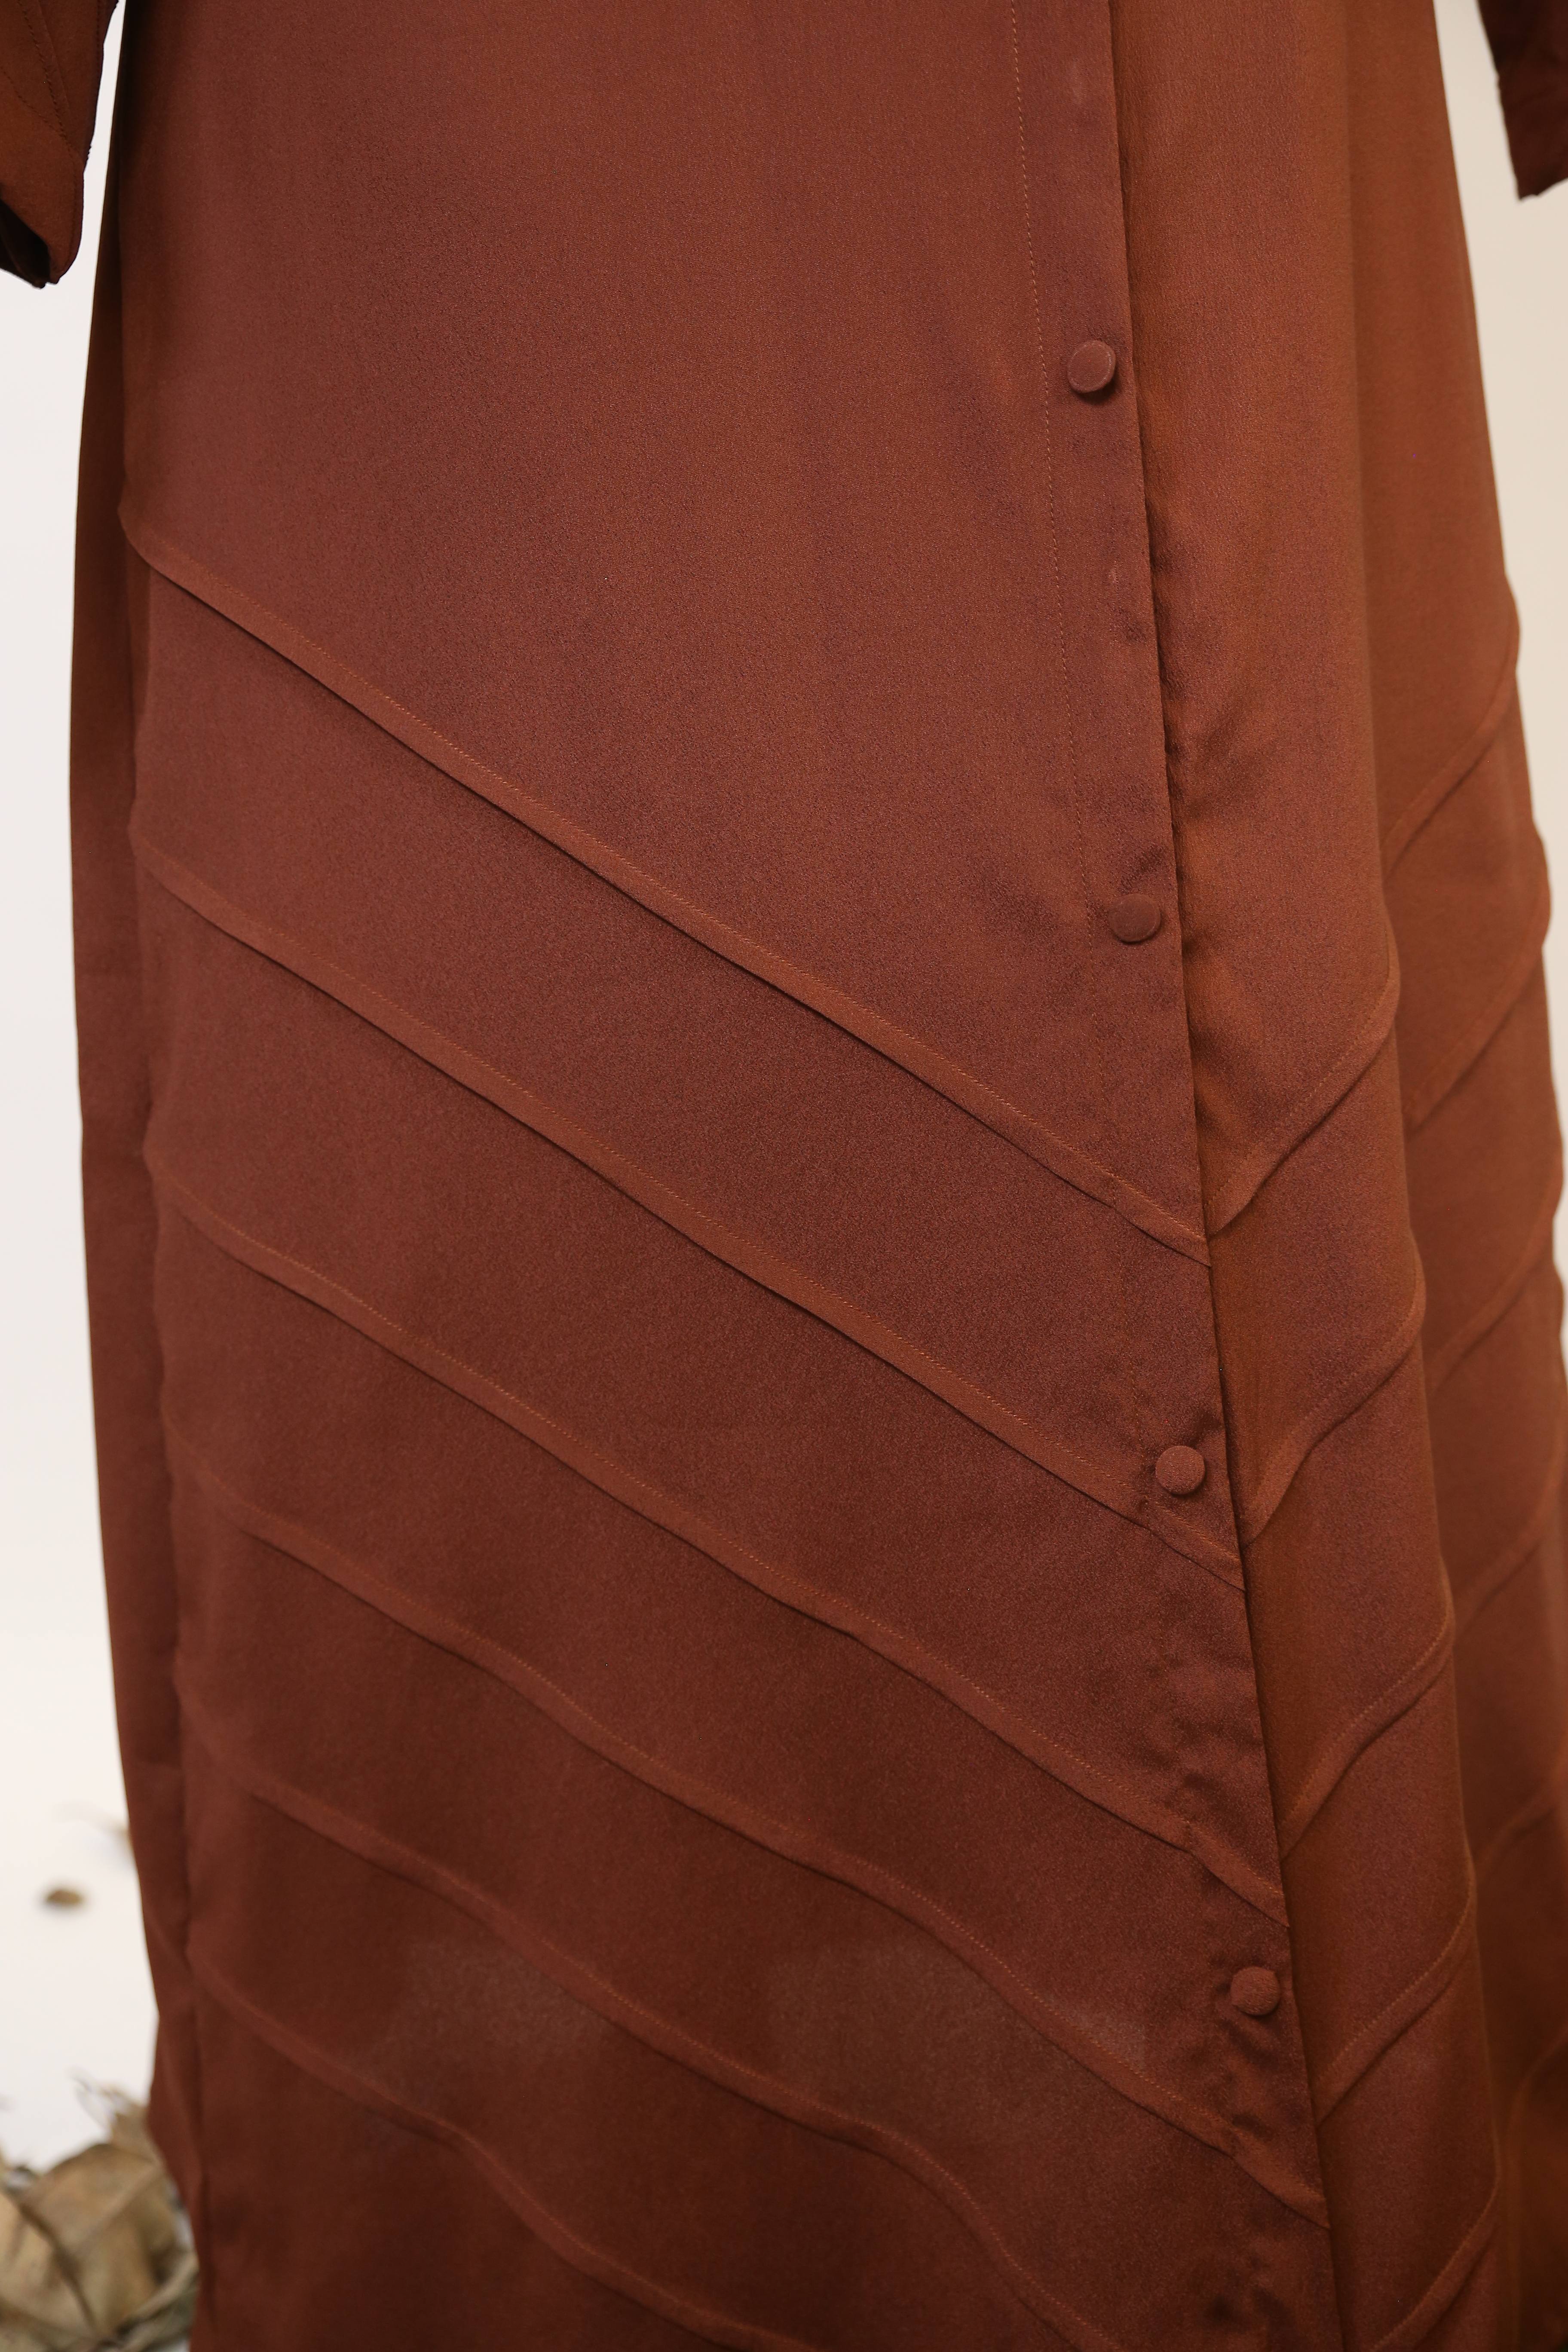 Saher- Enchanting wrinkle free abaya dress with piping details- Cocoa Brown